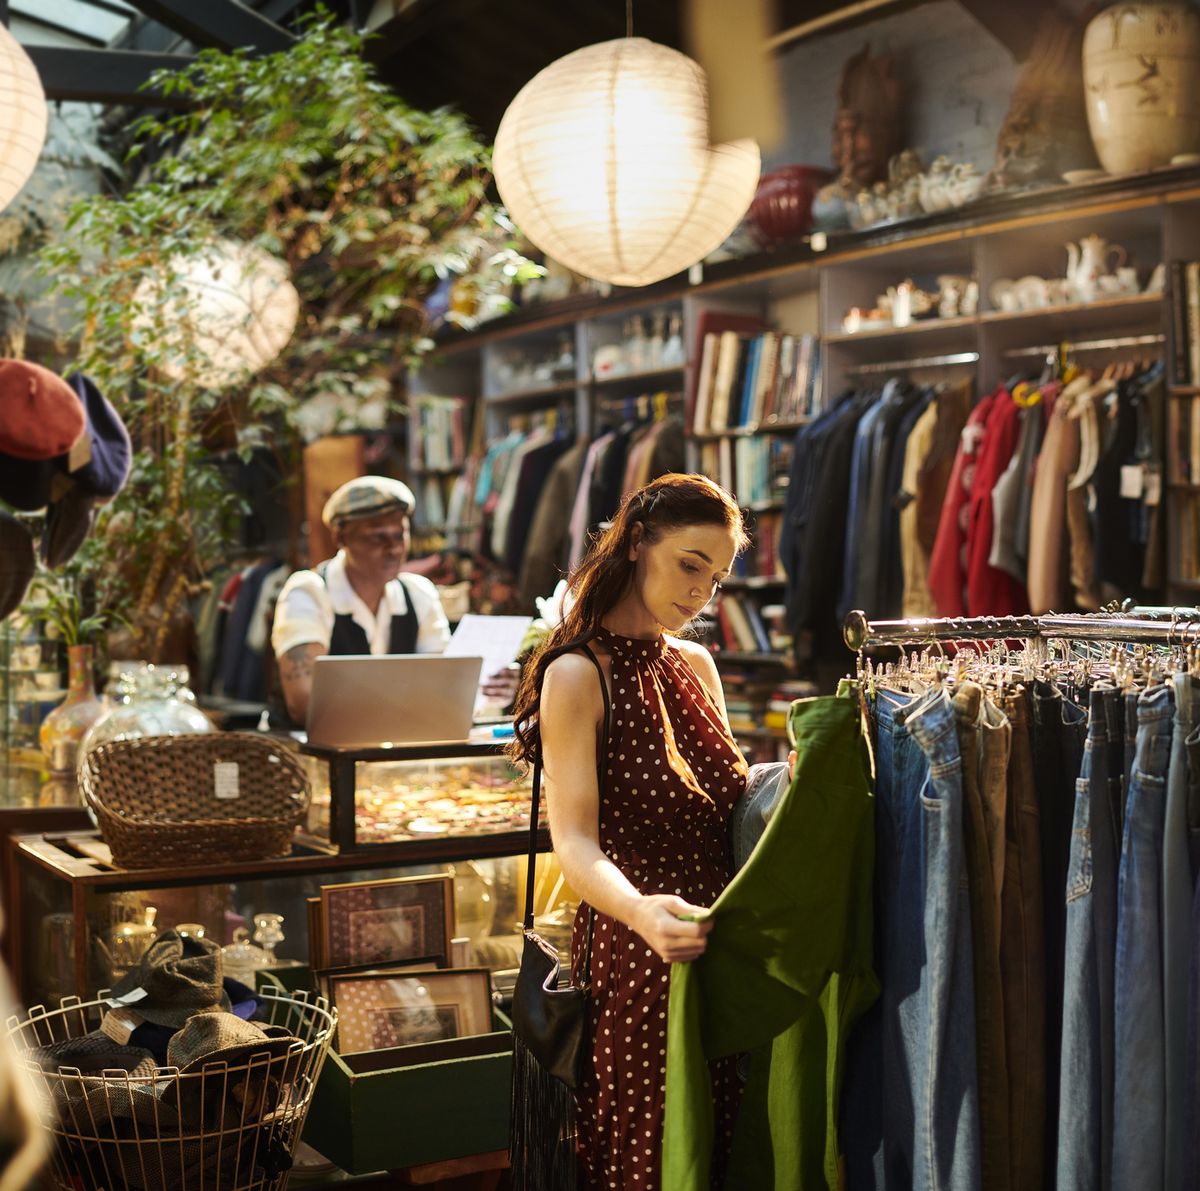 What are your rights when you shop second-hand?